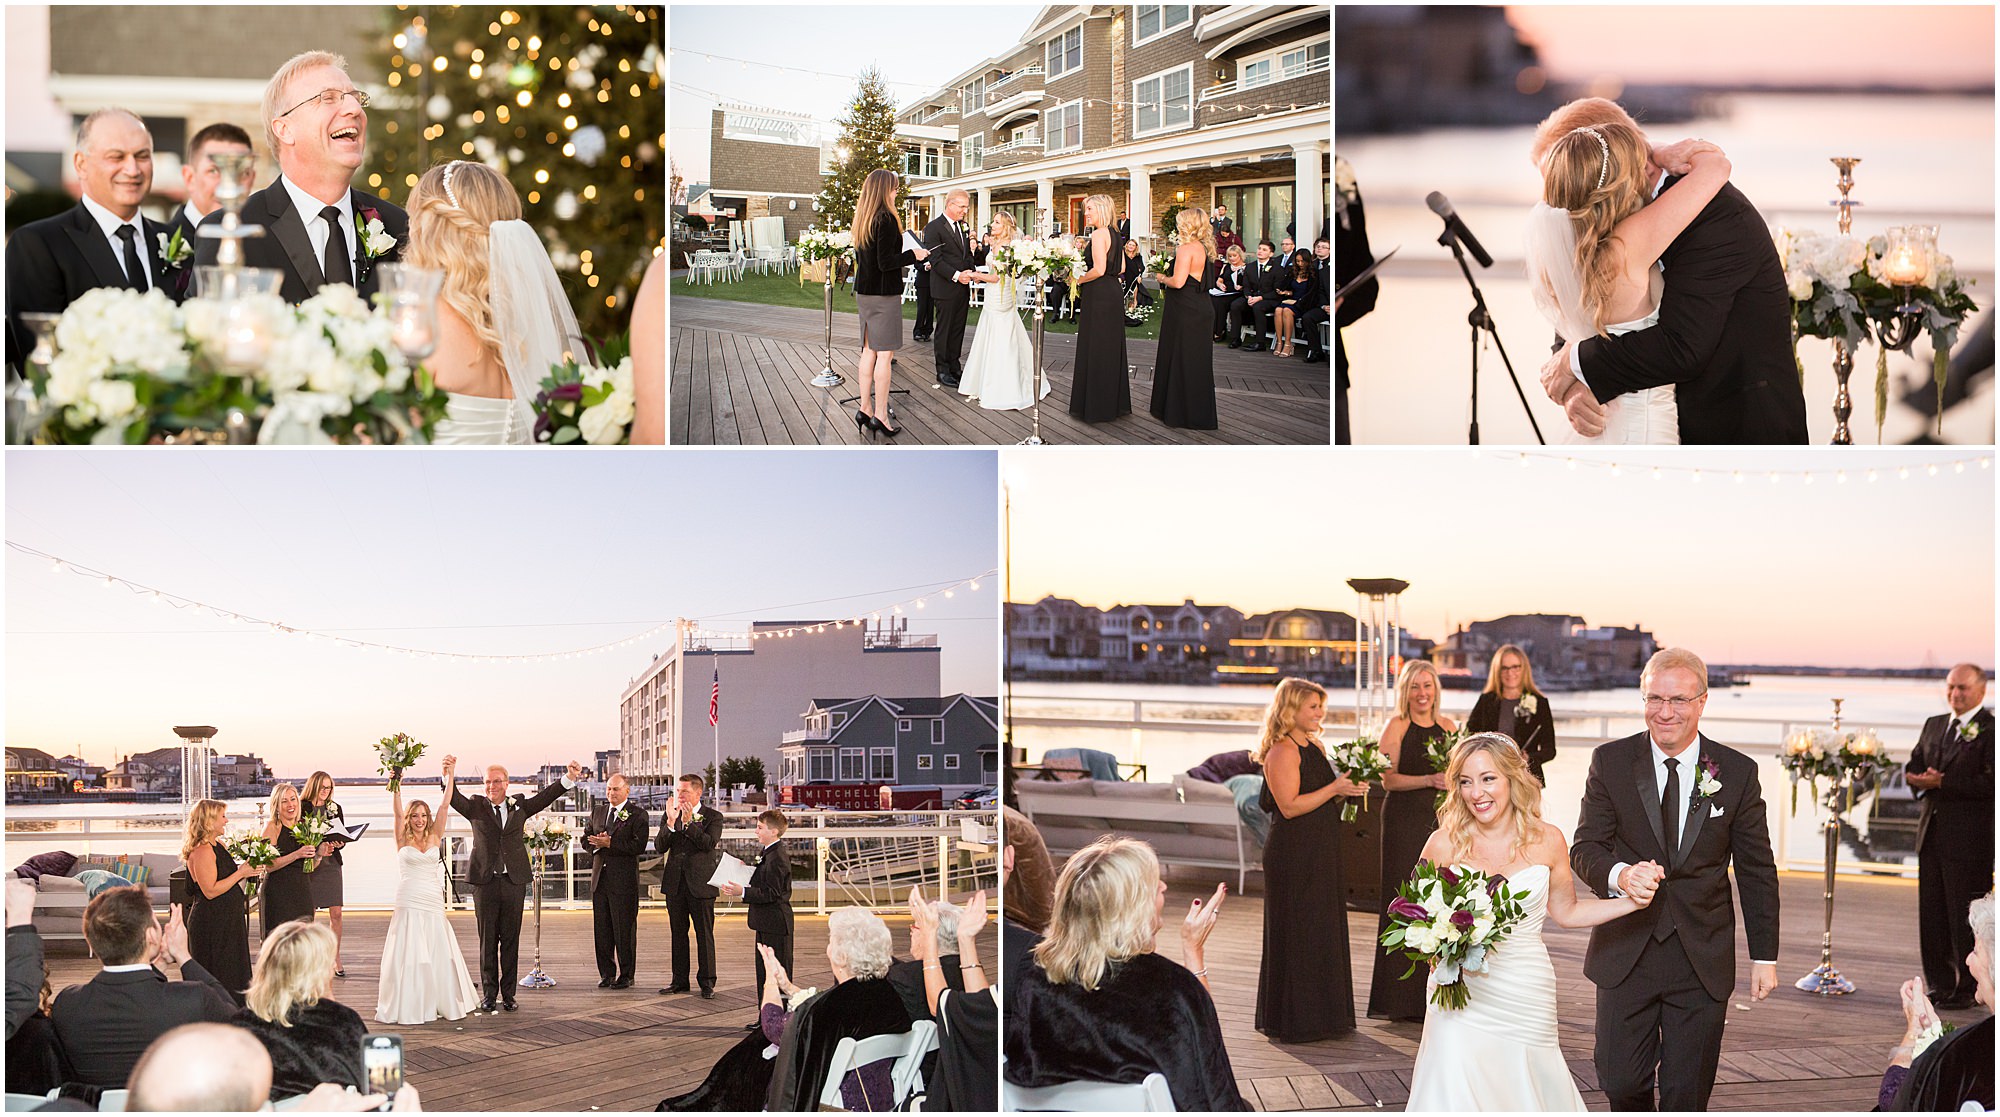 The outdoor ceremony space at the Reeds at Shelter Haven makes it one of the best Jersey Shore wedding venues